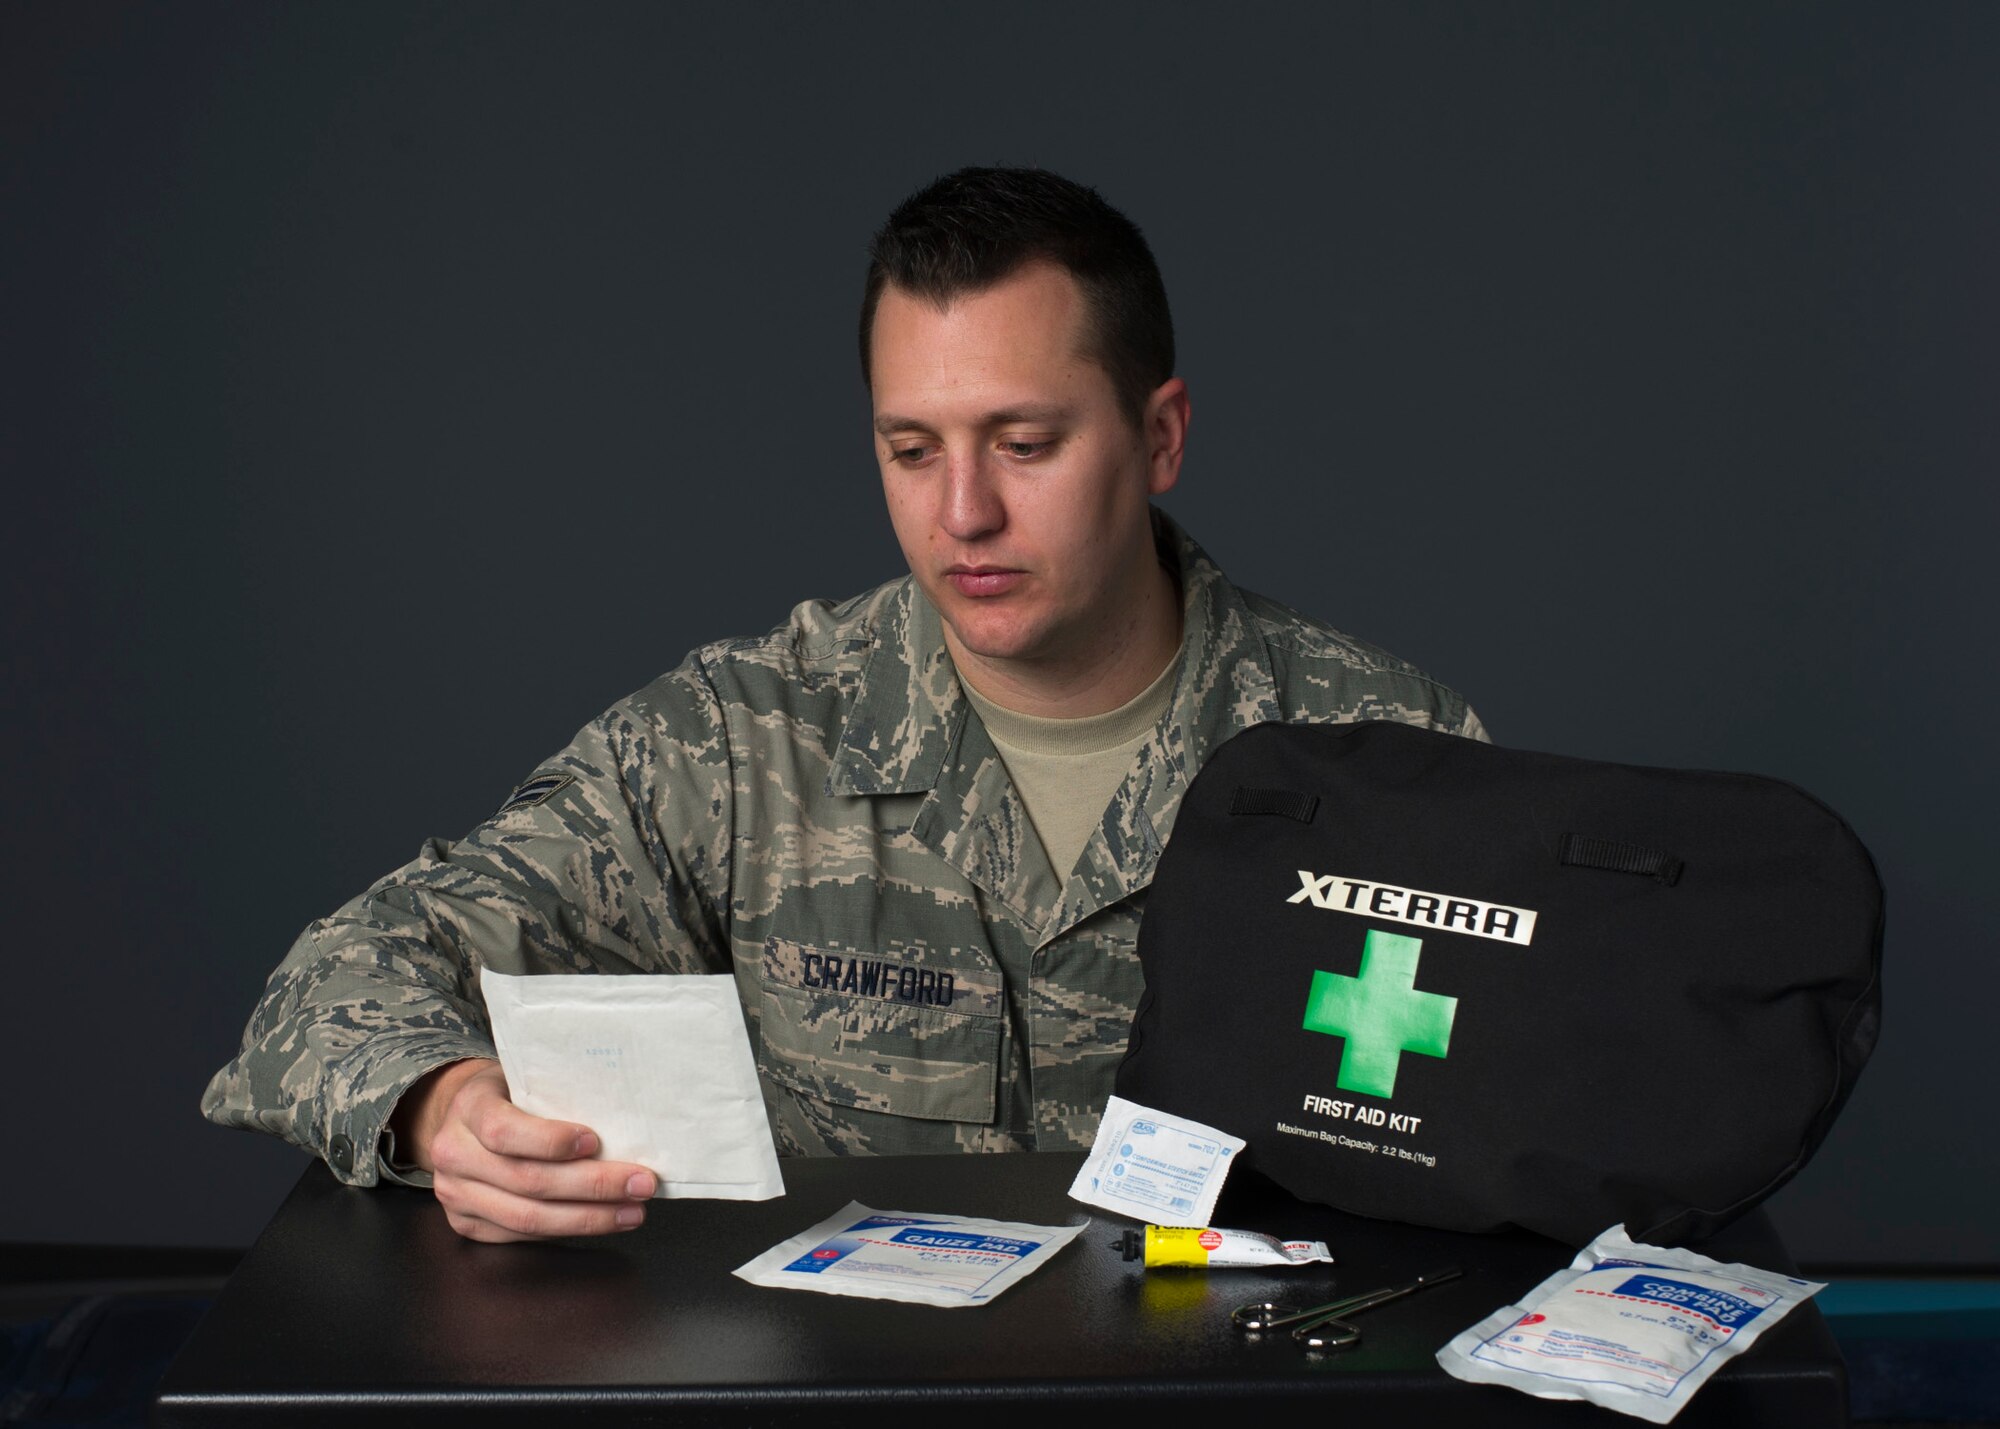 Airman 1st Class Richard Crawford, 60th Communications Squadron cyber security journeyman, looks at the contents of his first aid kit at Travis Air Force Base, Calif., Jan. 5, 2017. Crawford used the kit to care for an injured motorcyclist while traveling in Northern California. (US Air Force Photo by T.C. Perkins Jr.)